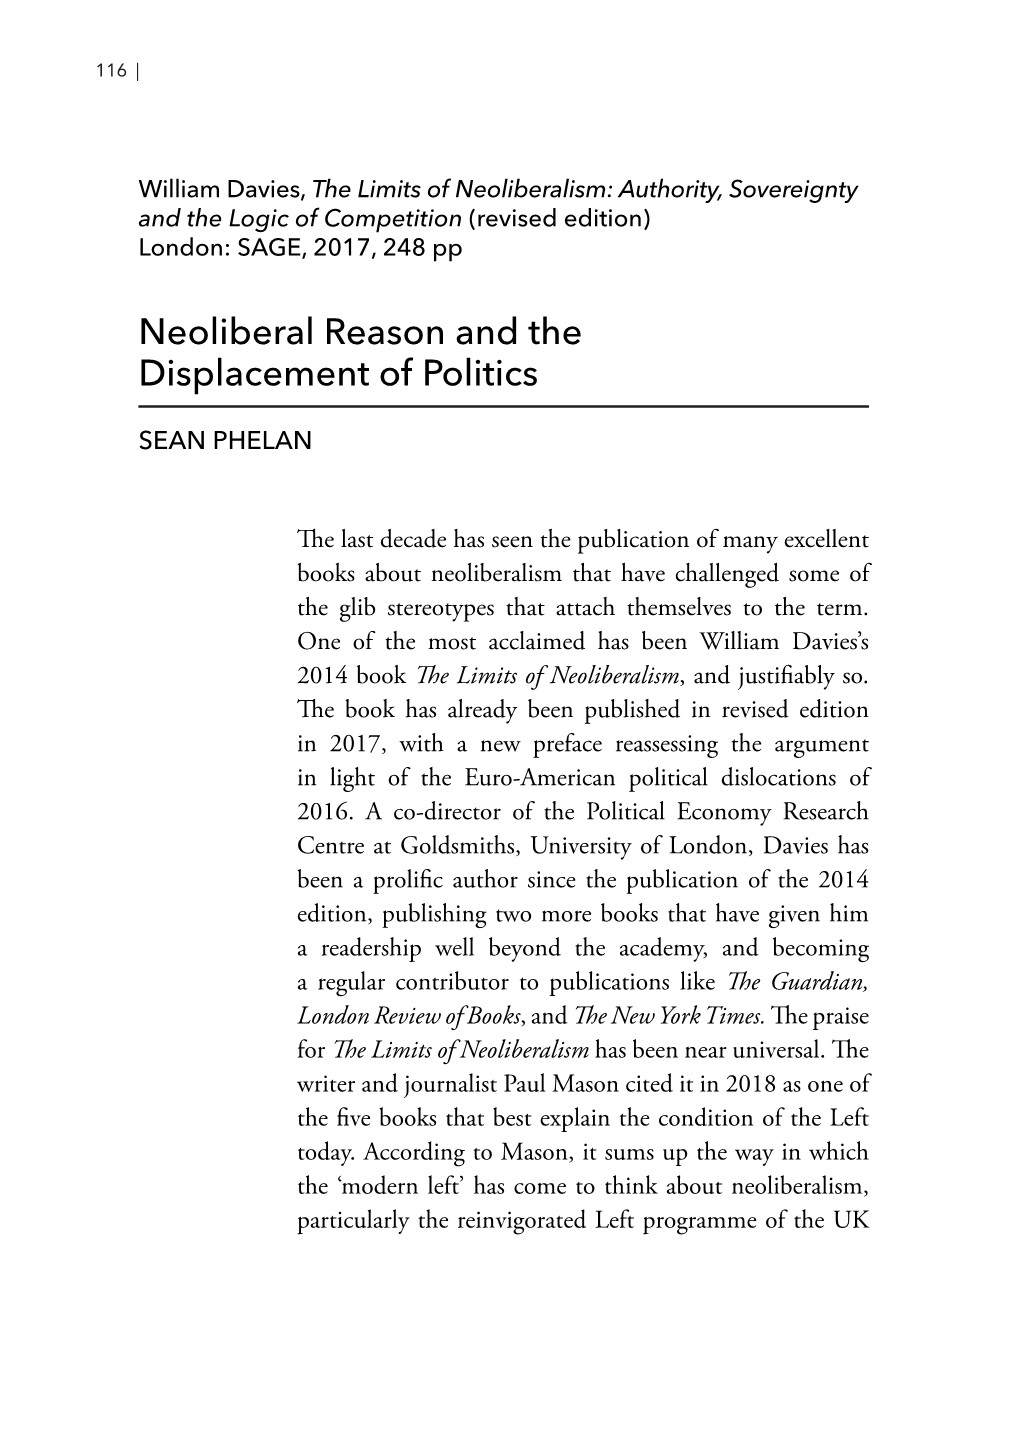 Neoliberal Reason and the Displacement of Politics